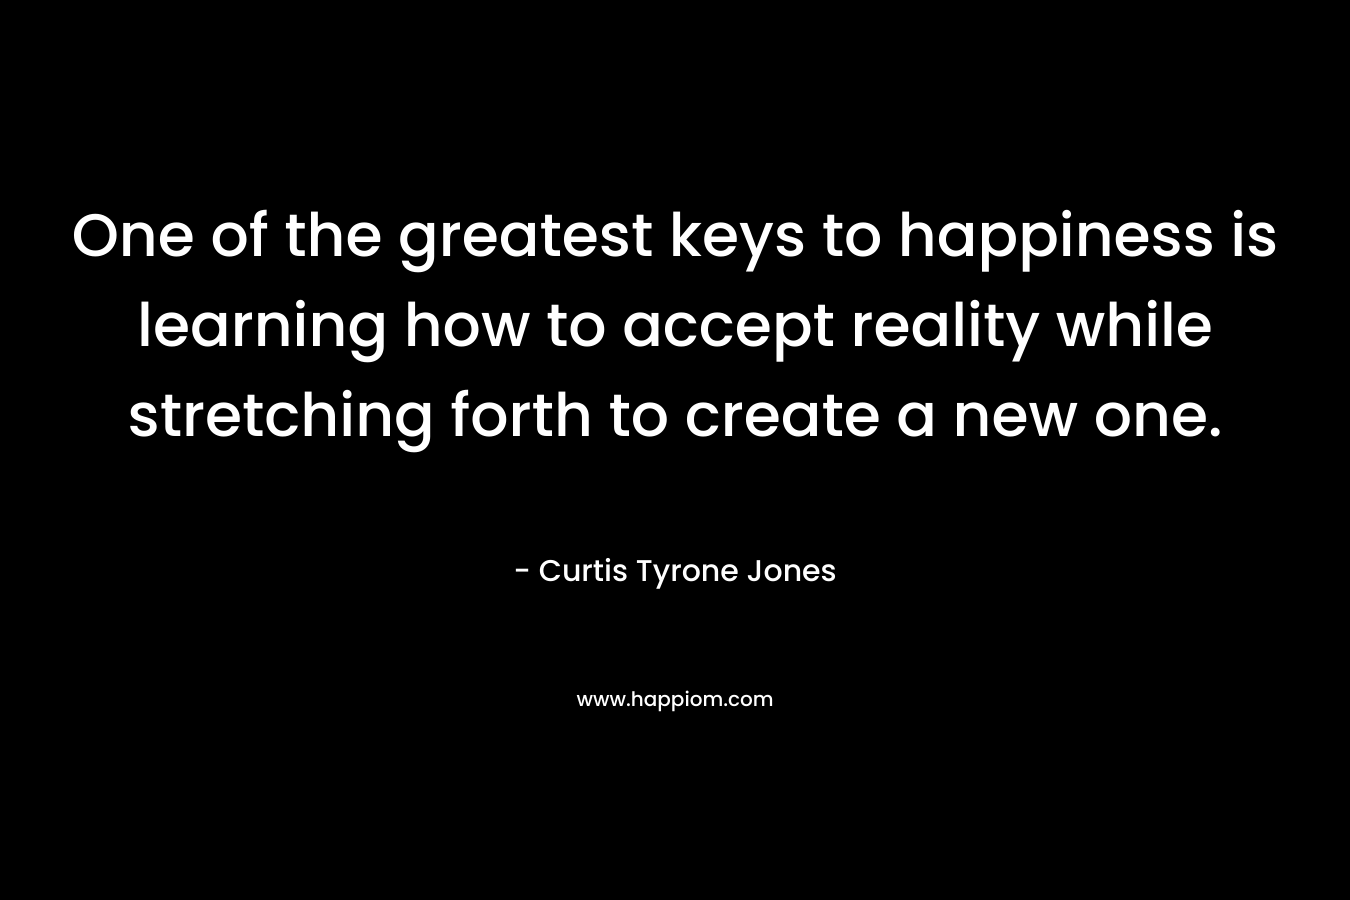 One of the greatest keys to happiness is learning how to accept reality while stretching forth to create a new one.